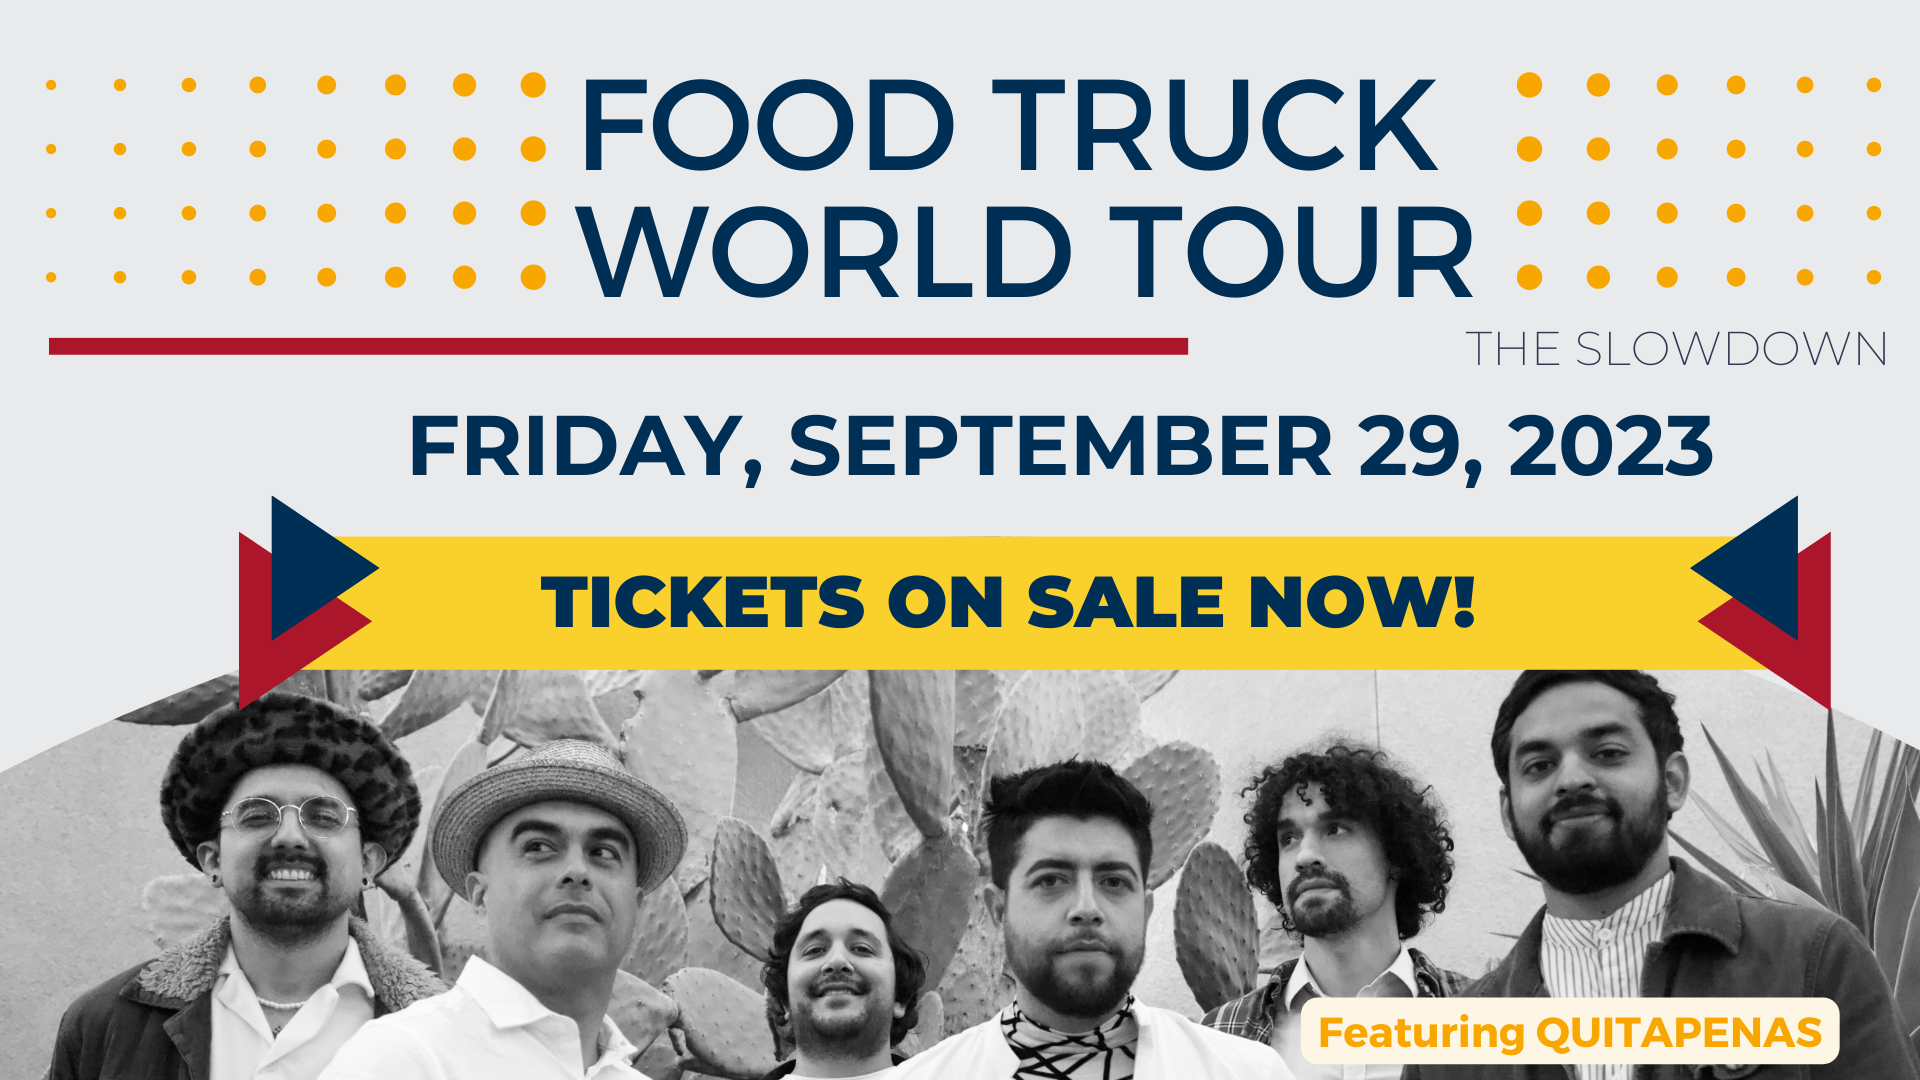 Food Truck World Tour Tickets on Sale now at www.immigrantlc.org/foodtruck